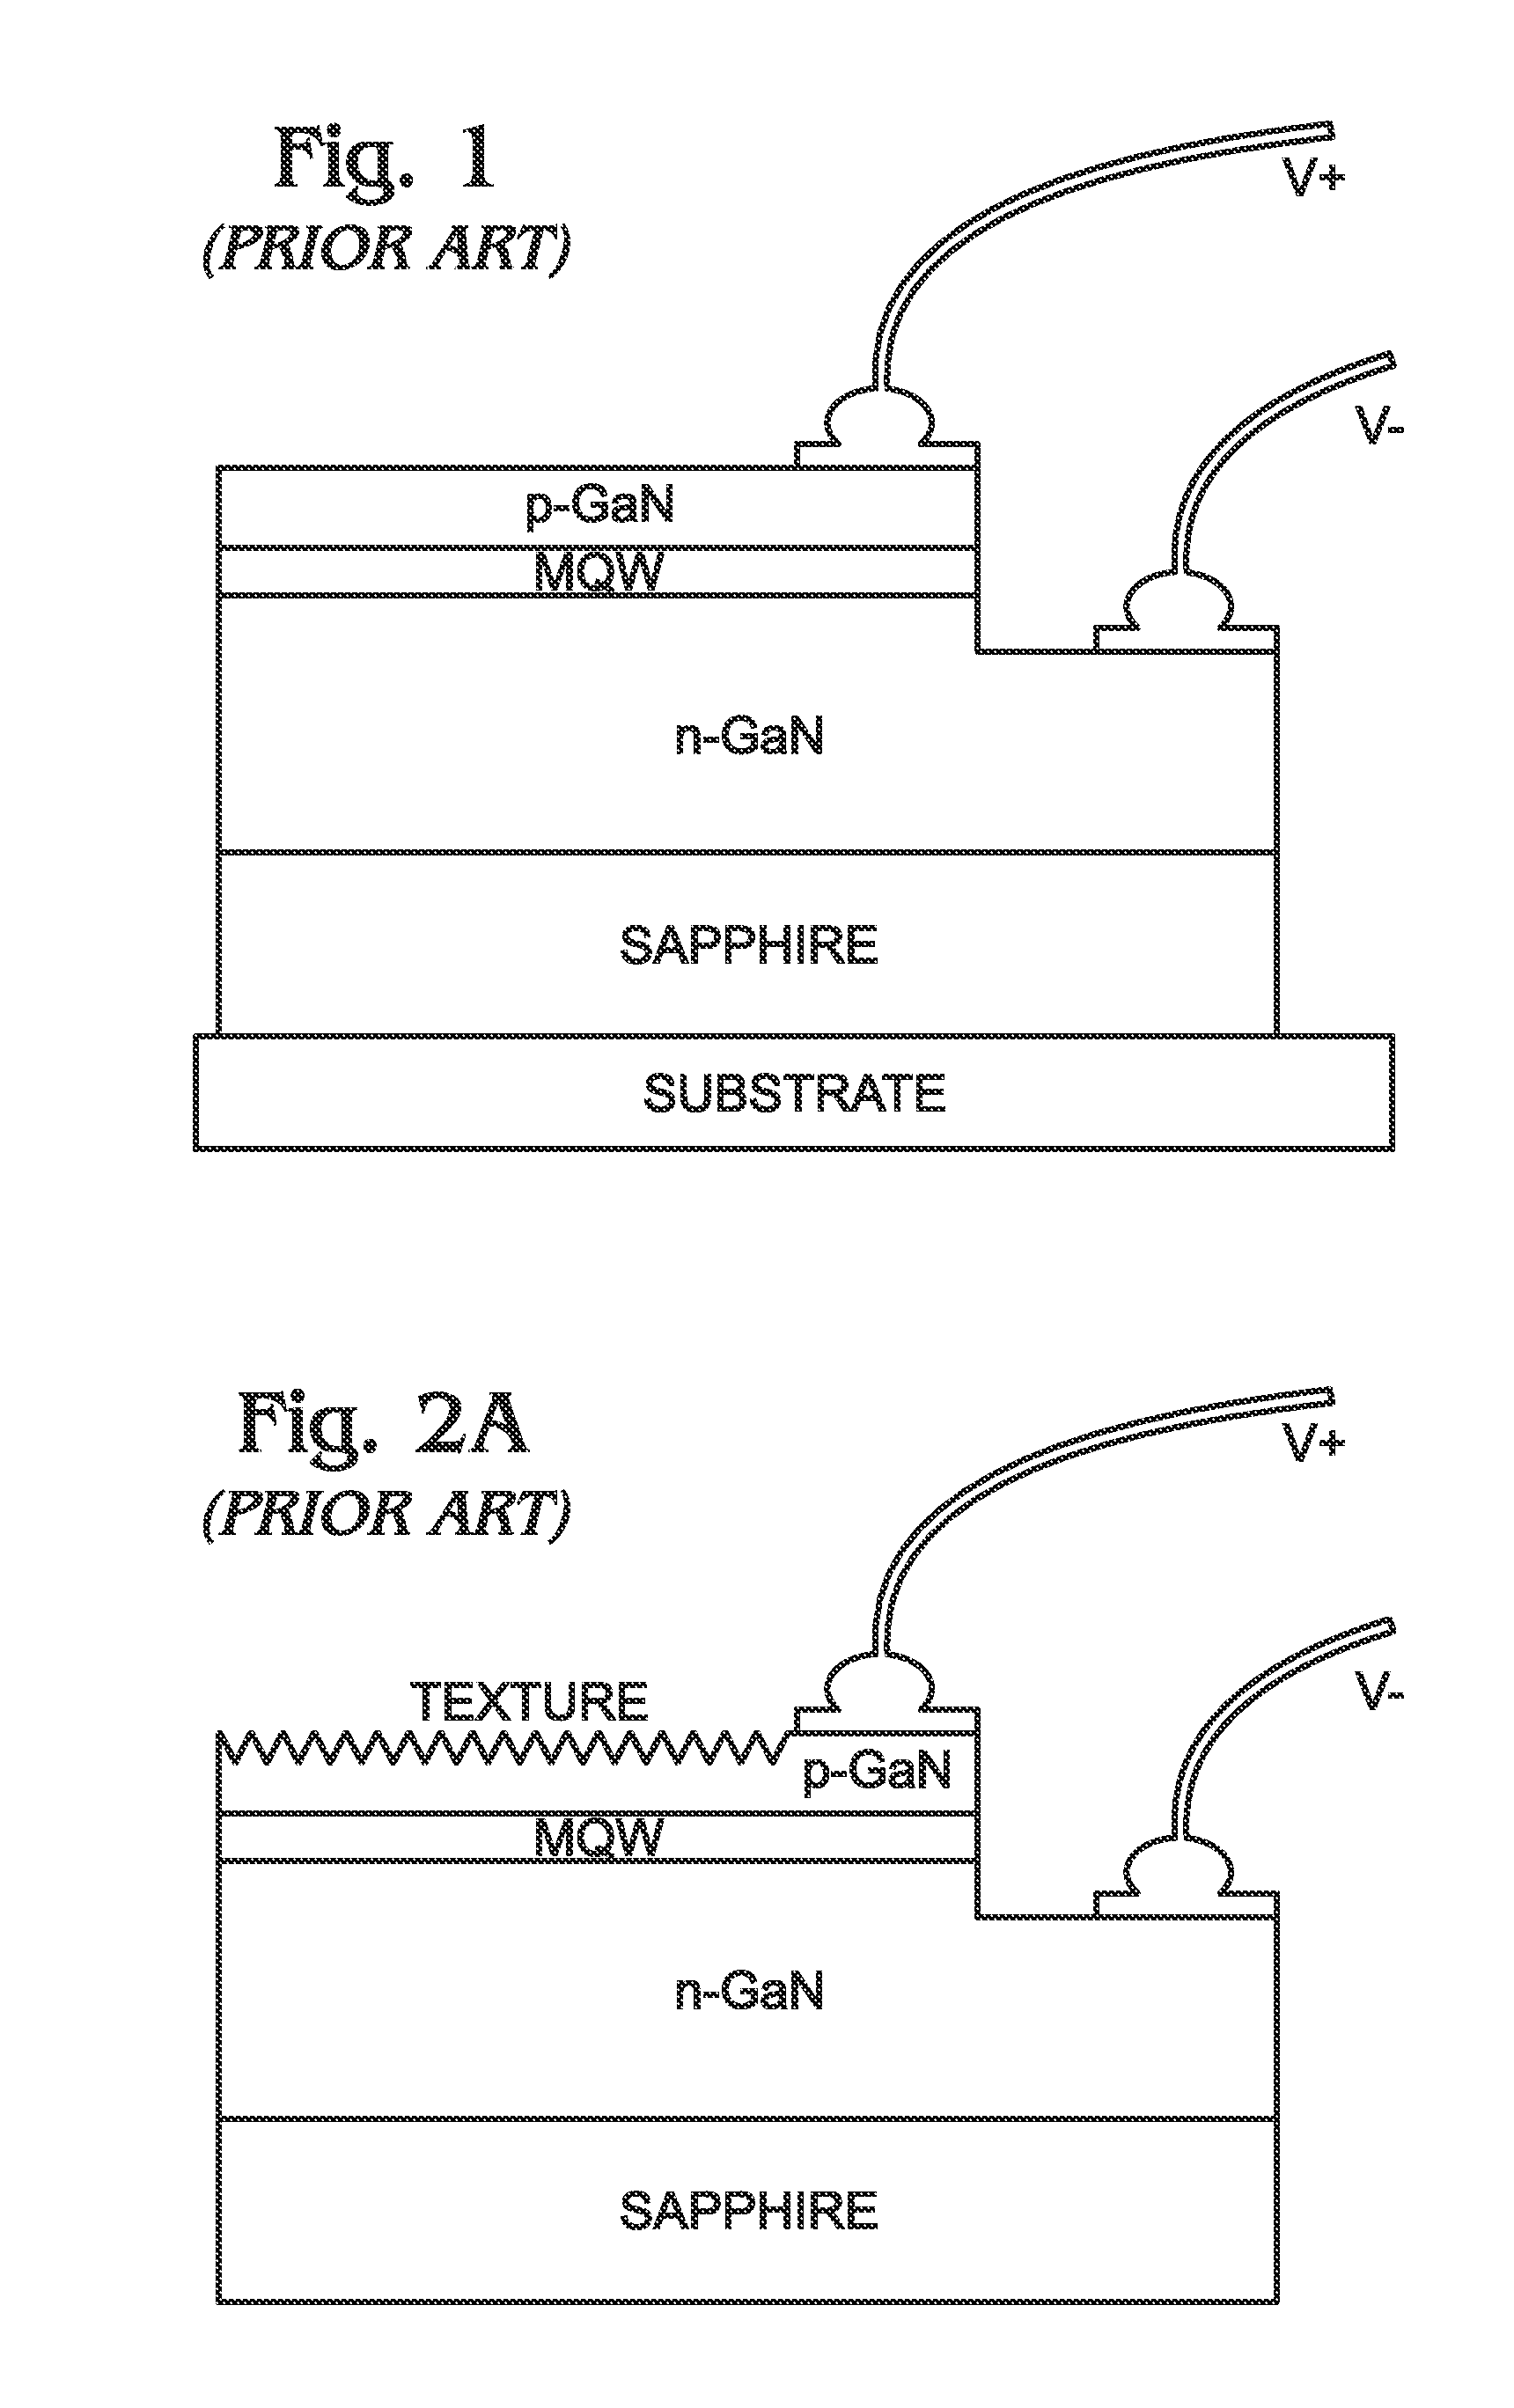 Method for fabricating three-dimensional gallium nitride structures with planar surfaces